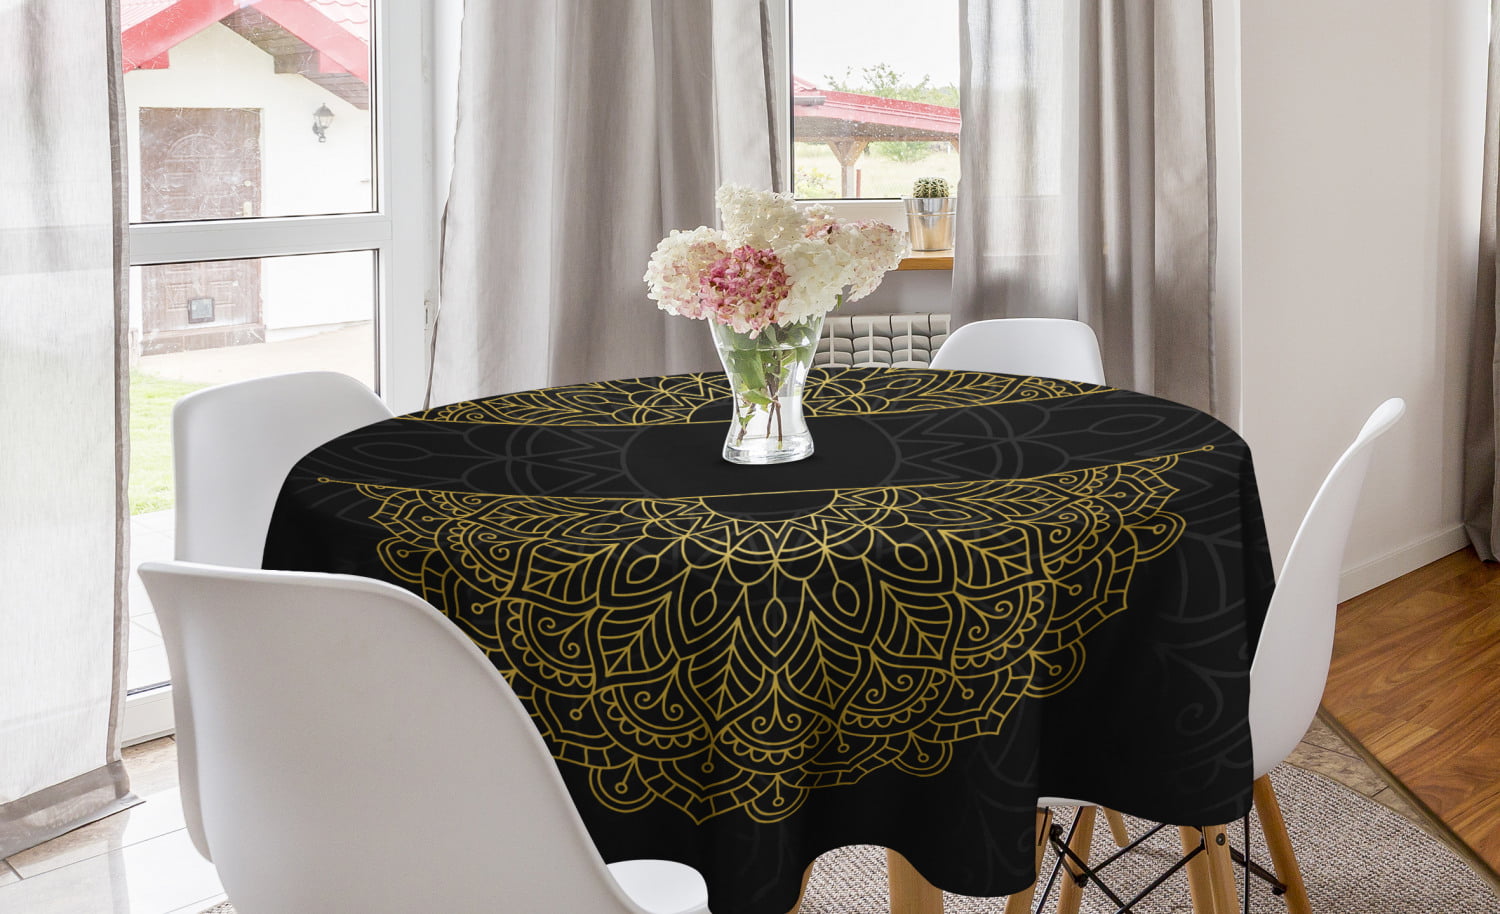 Stitching Like Looking Retro Style Circular Motifs Round Formations Ambesonne Abstract Tablecloth 52 X 70 Eggshell and Chocolate Rectangular Table Cover for Dining Room Kitchen Decor